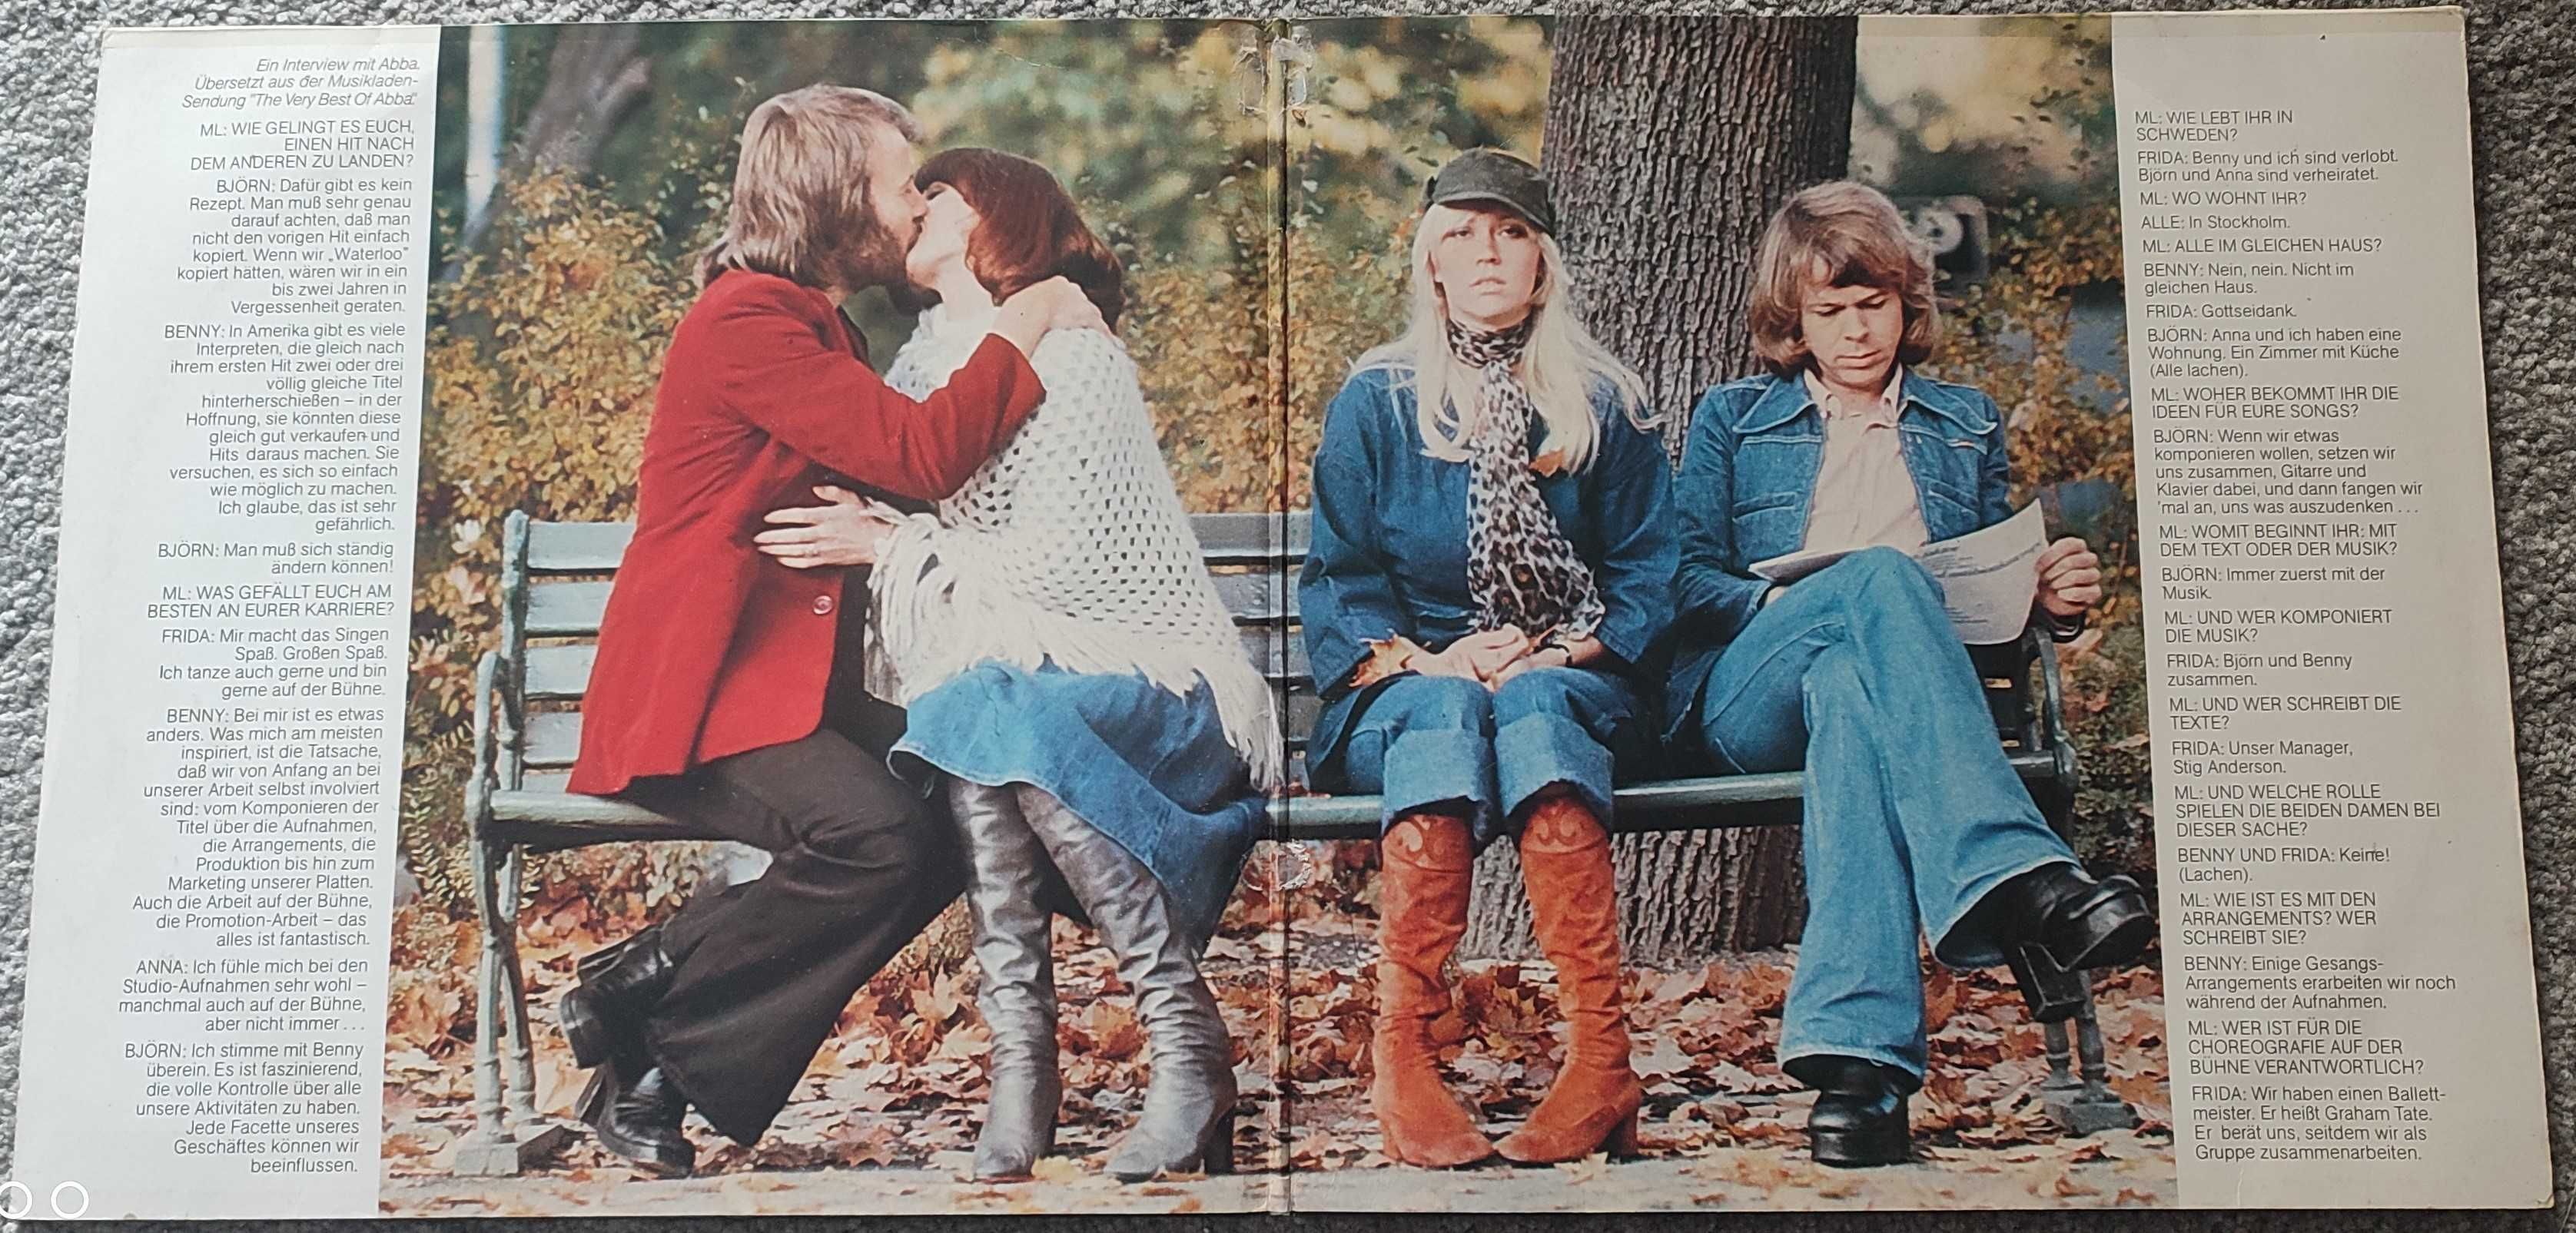 ABBA - The Very Best of ABBA (ABBA'S Greatest Hits) - 2 LP Vinil